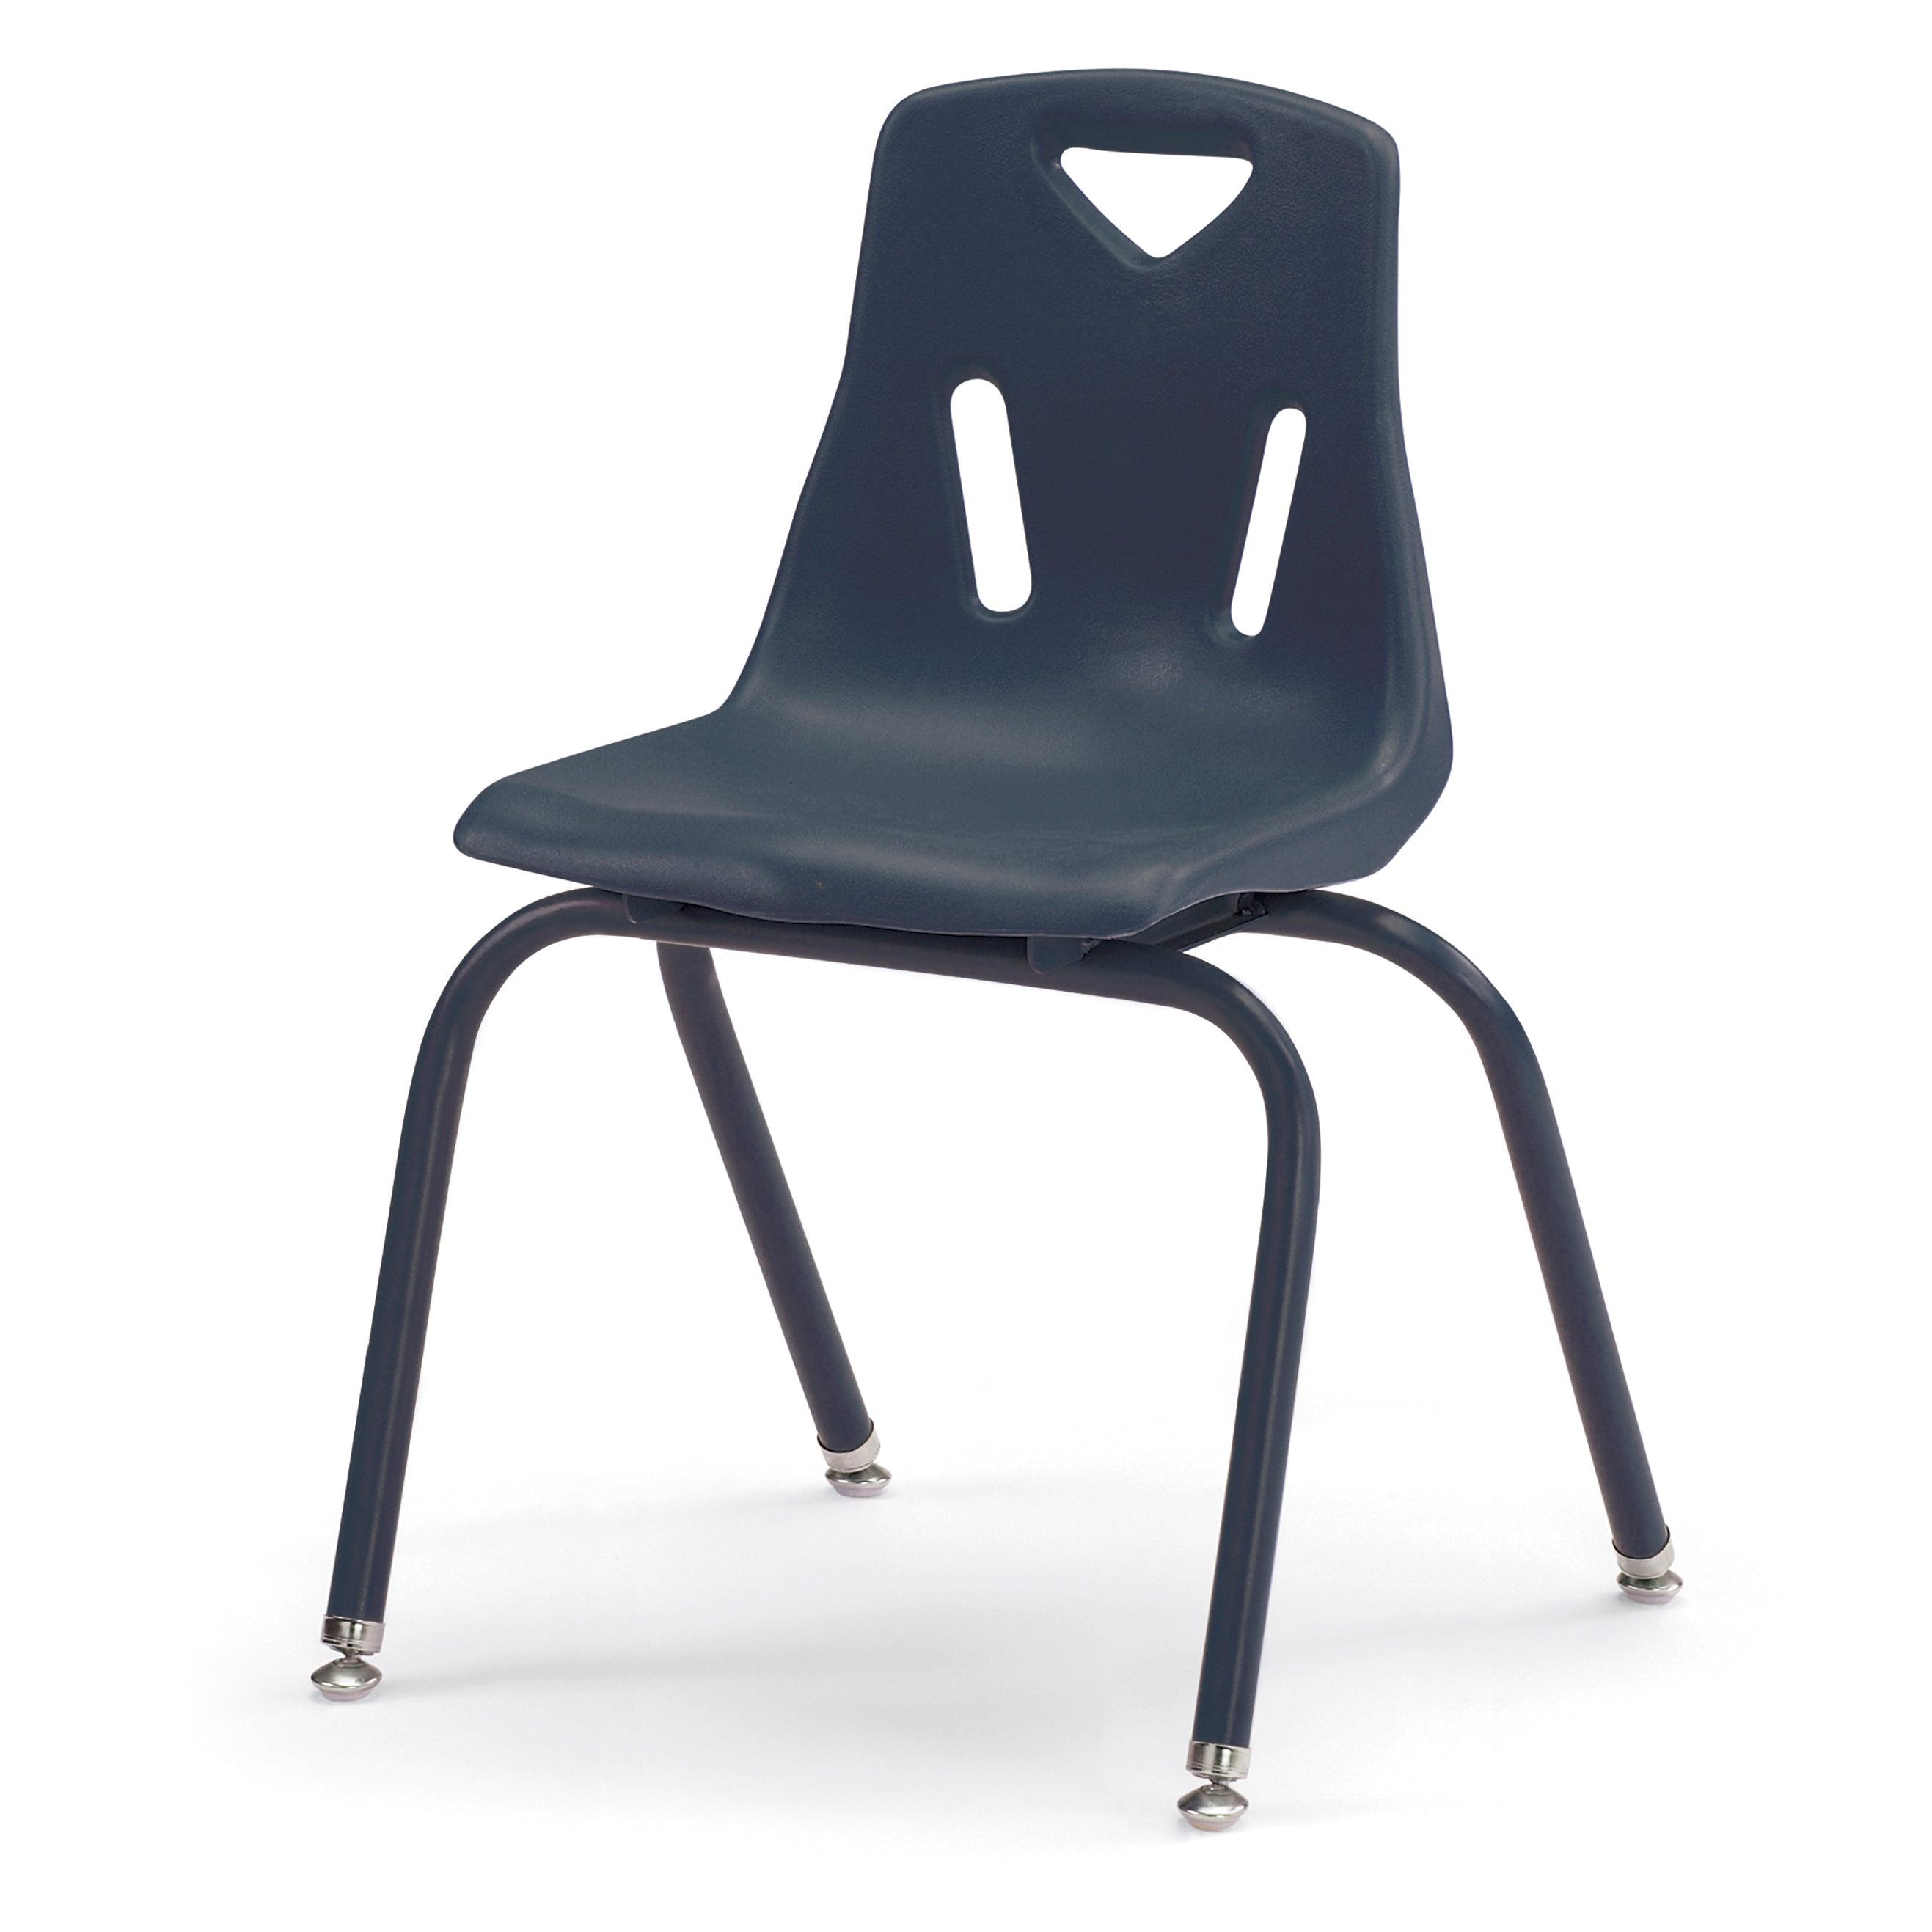 8126JC1112, Berries Stacking Chair with Powder-Coated Legs - 16" Ht - Navy